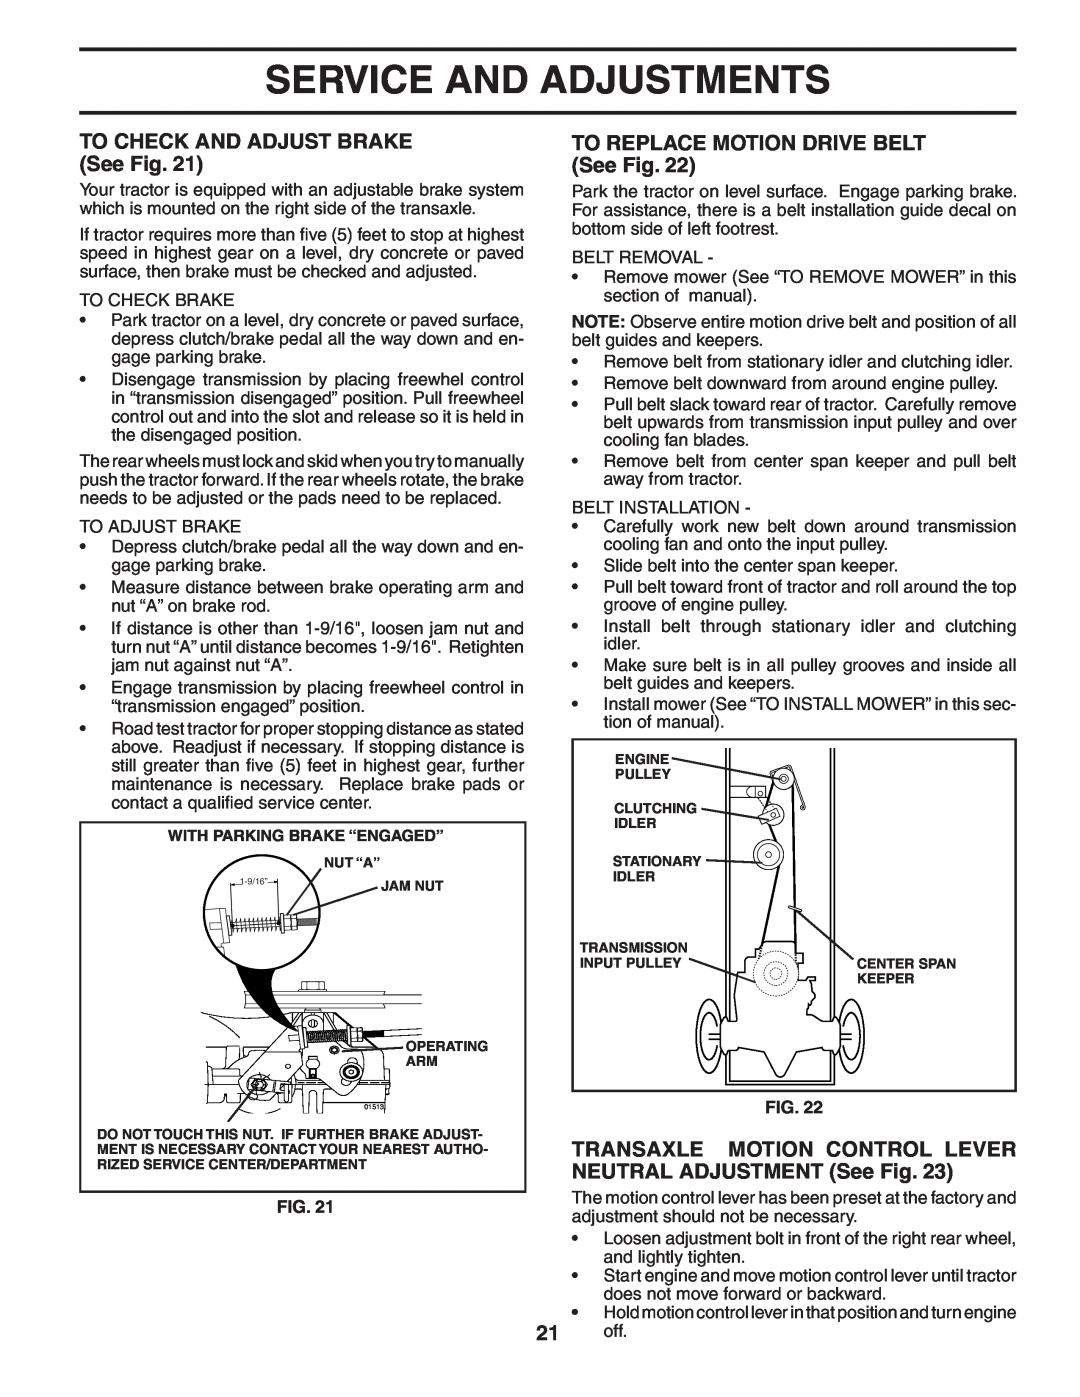 Poulan 405327 manual TO CHECK AND ADJUST BRAKE See Fig, TO REPLACE MOTION DRIVE BELT See Fig, Service And Adjustments 